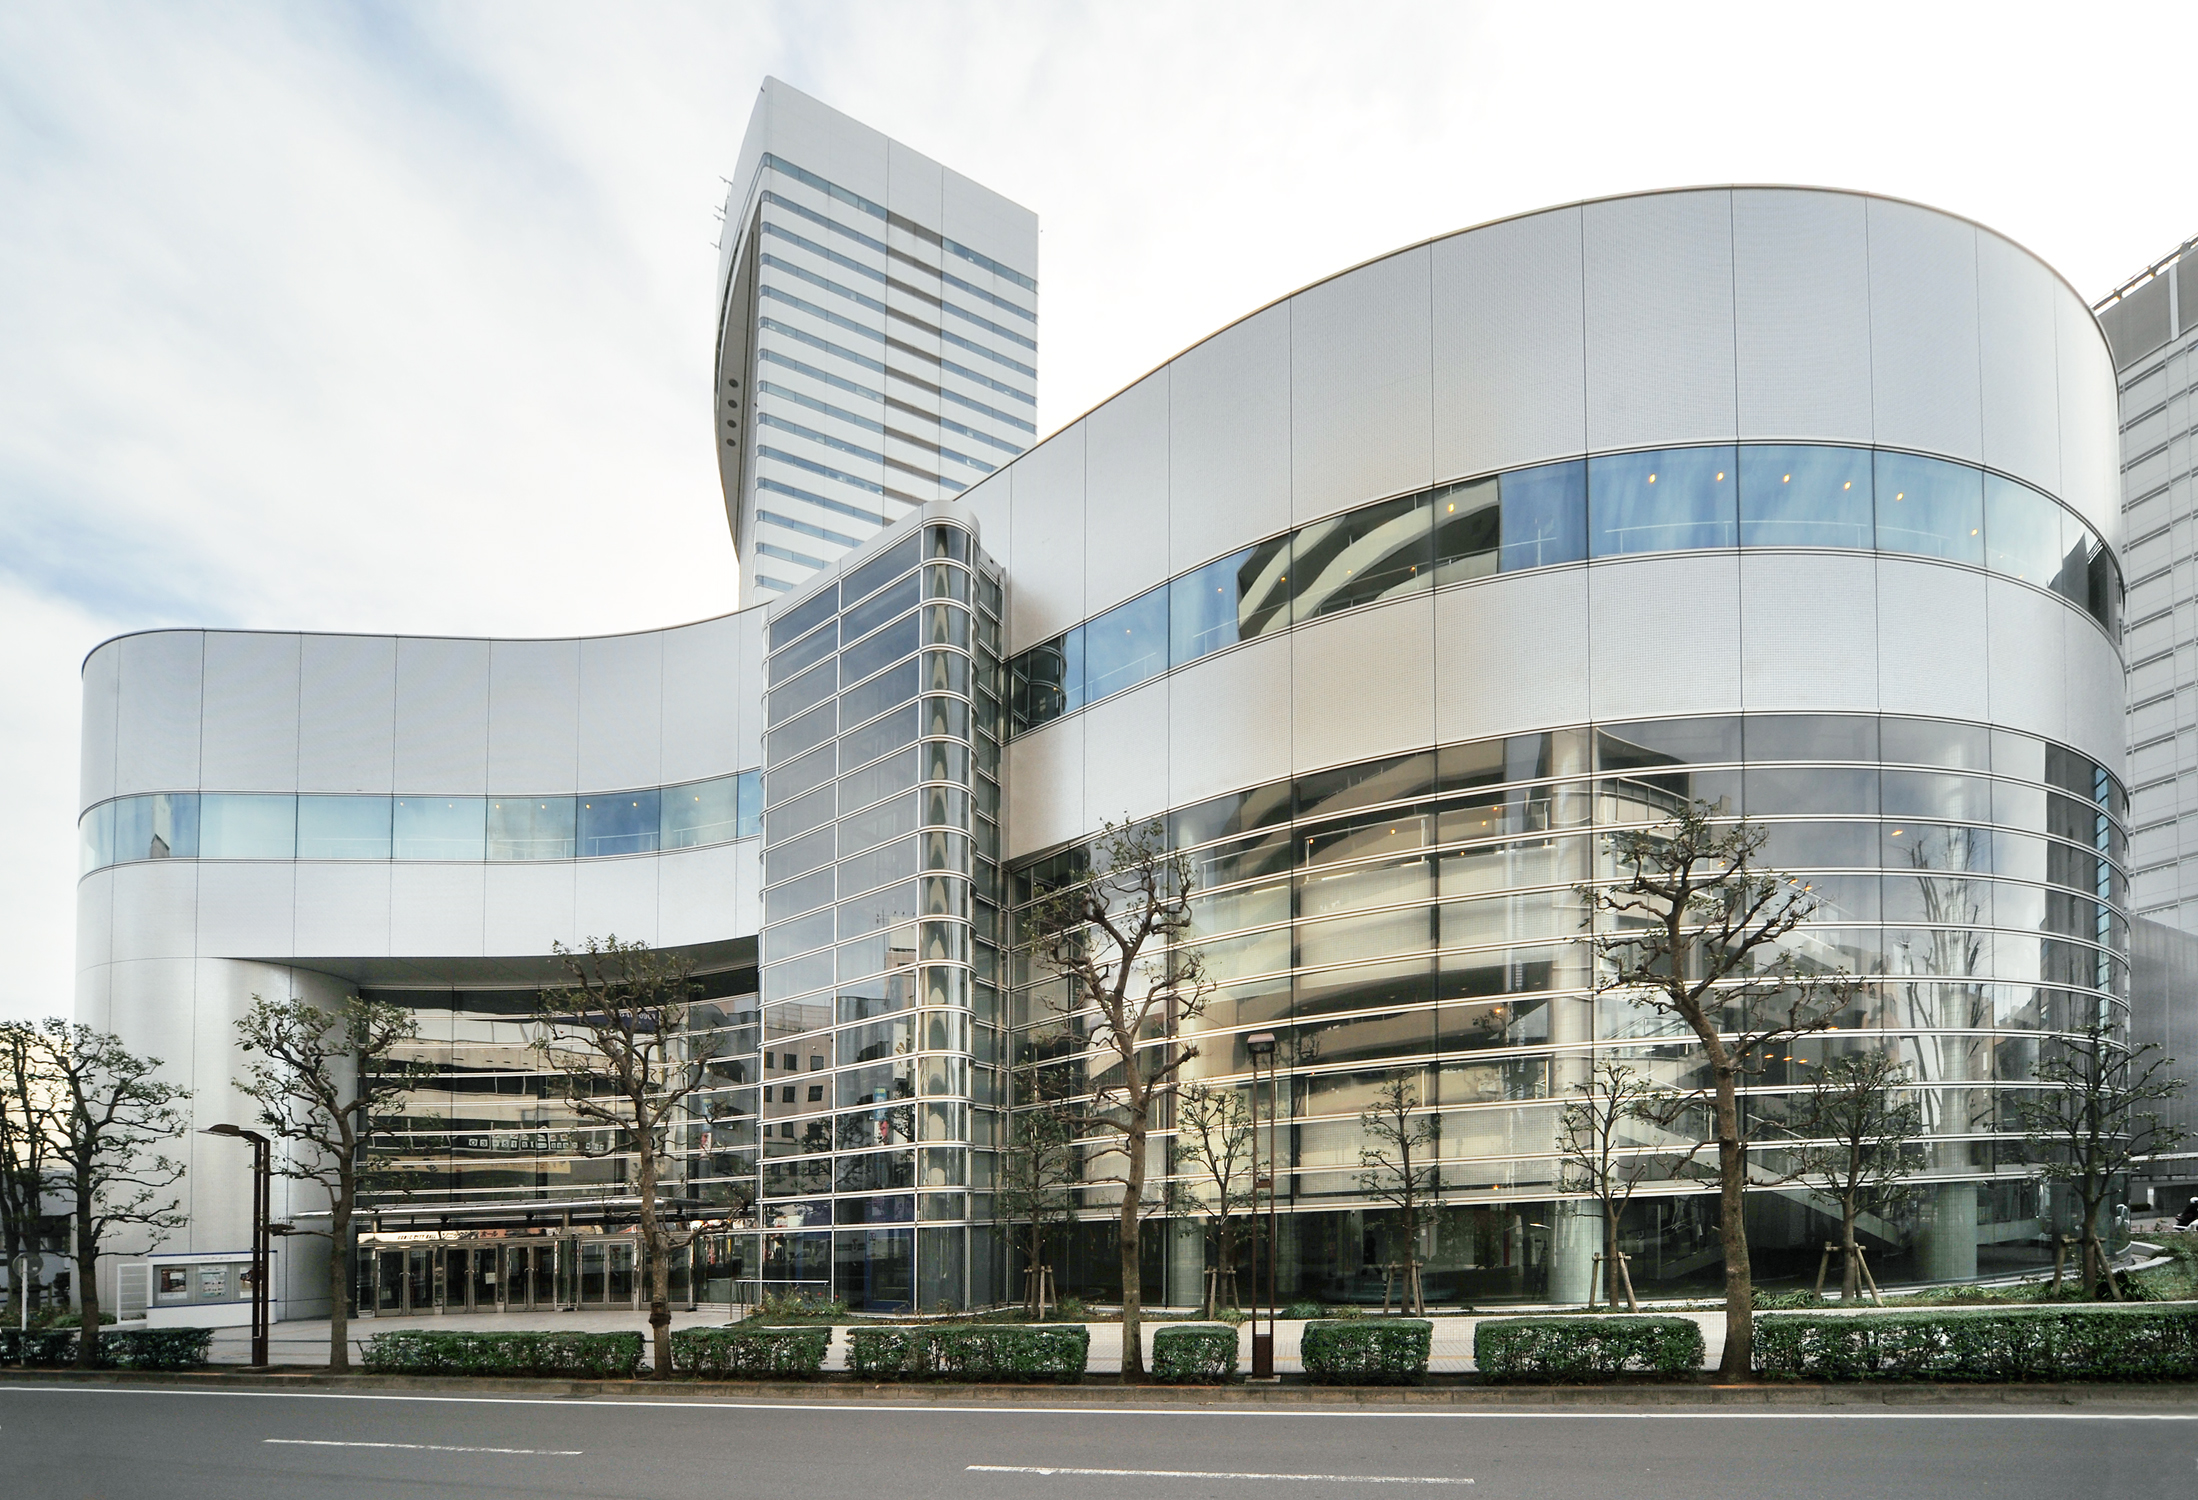 Upon its completion in 1988, Sonic City received the BCS Award for outstanding architectural works in Japan from the Japan Federation of Construction Contractors. The hall building has a large hall that can accommodate 2,500 people, as well as a small hall and international conference rooms.